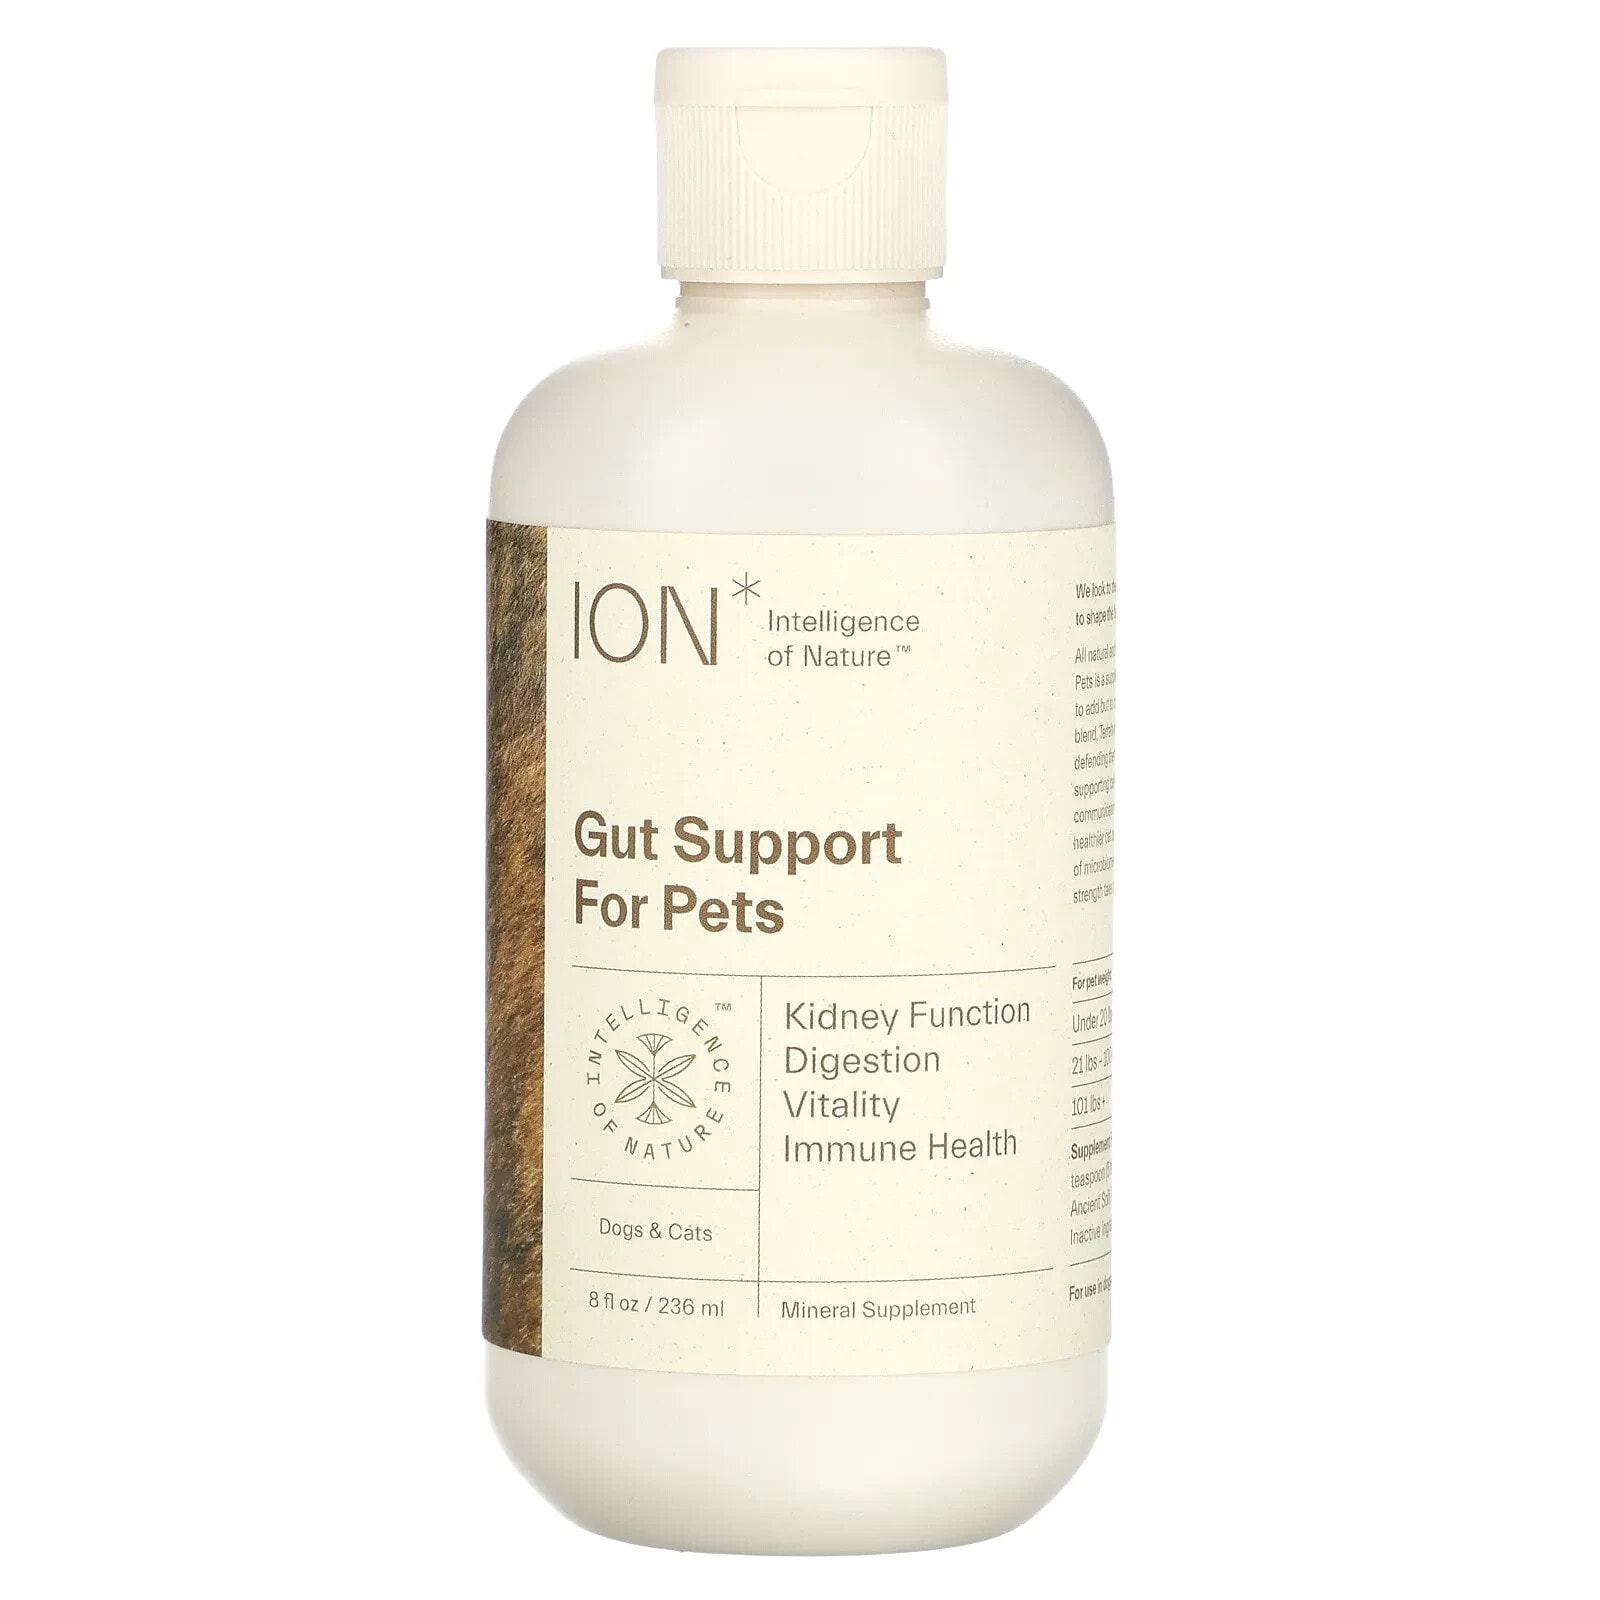 Gut Support For Pets, Dogs & Cats, 16 fl oz (473 ml)